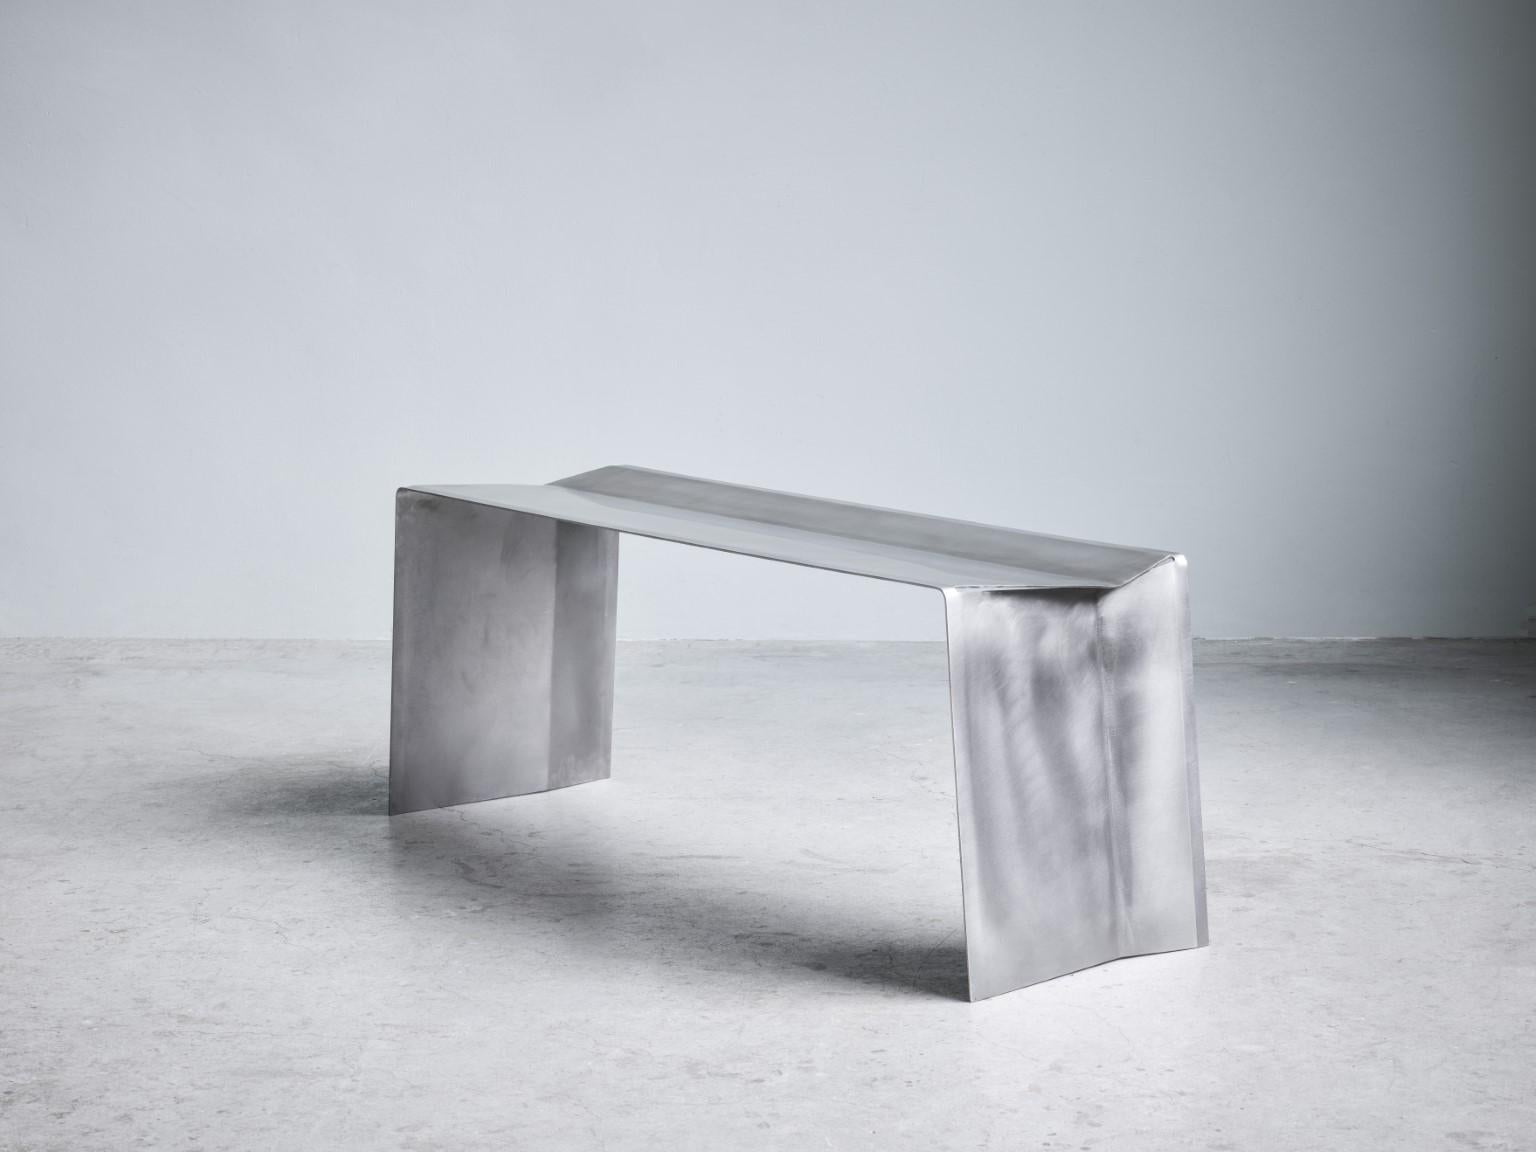 Camber bench, Paul Coenen
Dimensions: W 118 x D 37 x H 45 cm
Materials: Stainless steel

The Camber bench and stool originated from the idea of manufacturing a piece of furniture from a single piece of sheet metal.

The inclining angle of the